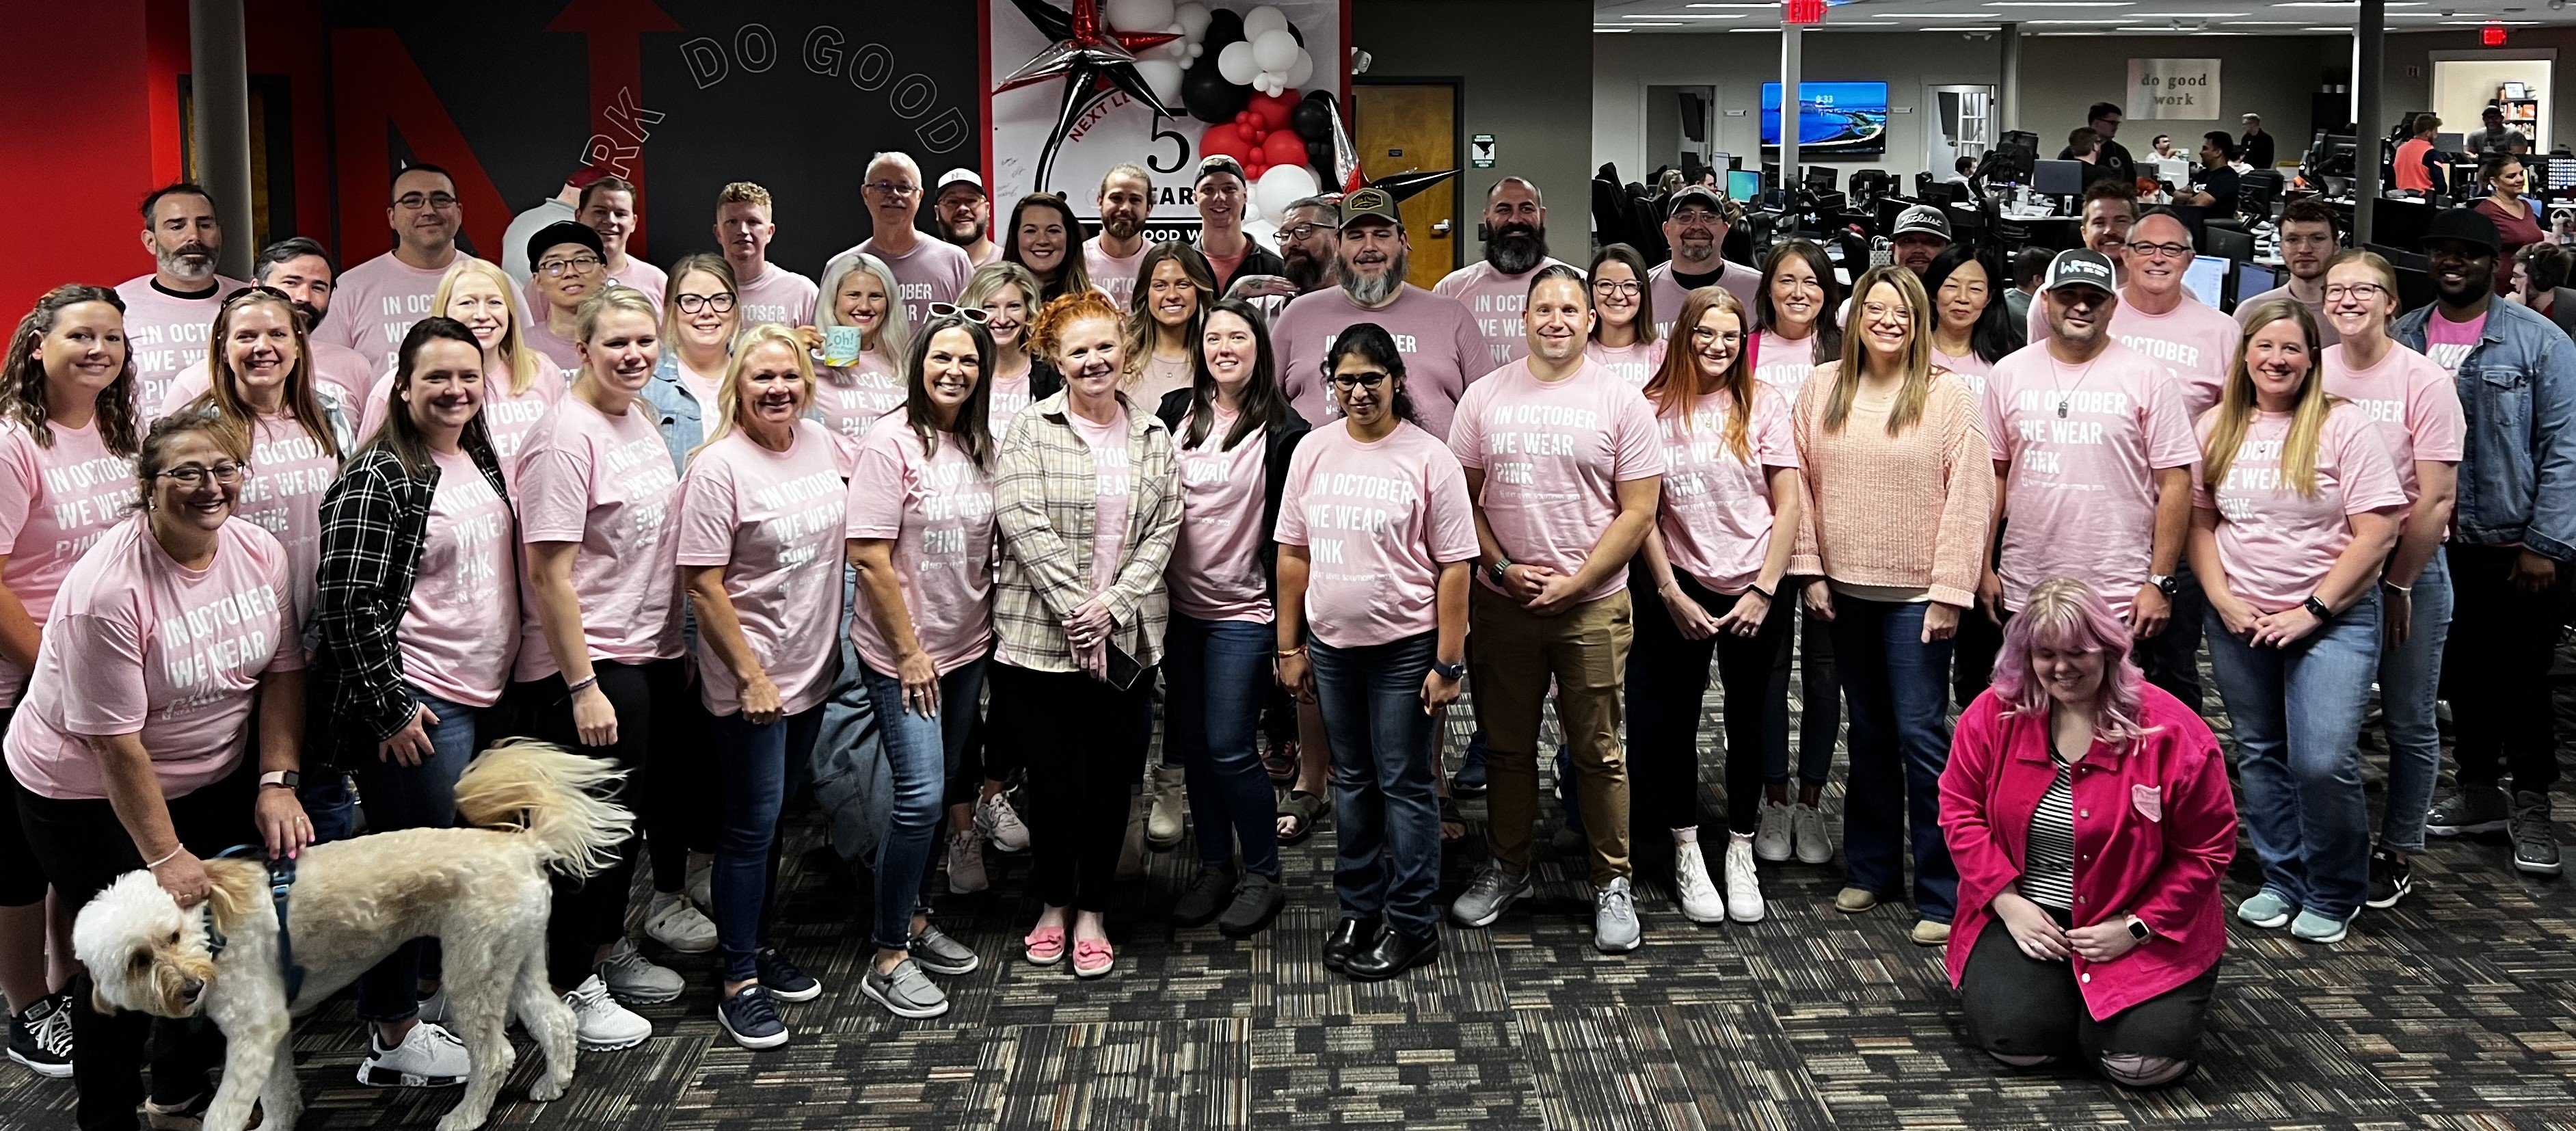 NLS employees wear pink shirts to show their support for Breast Cancer Awareness